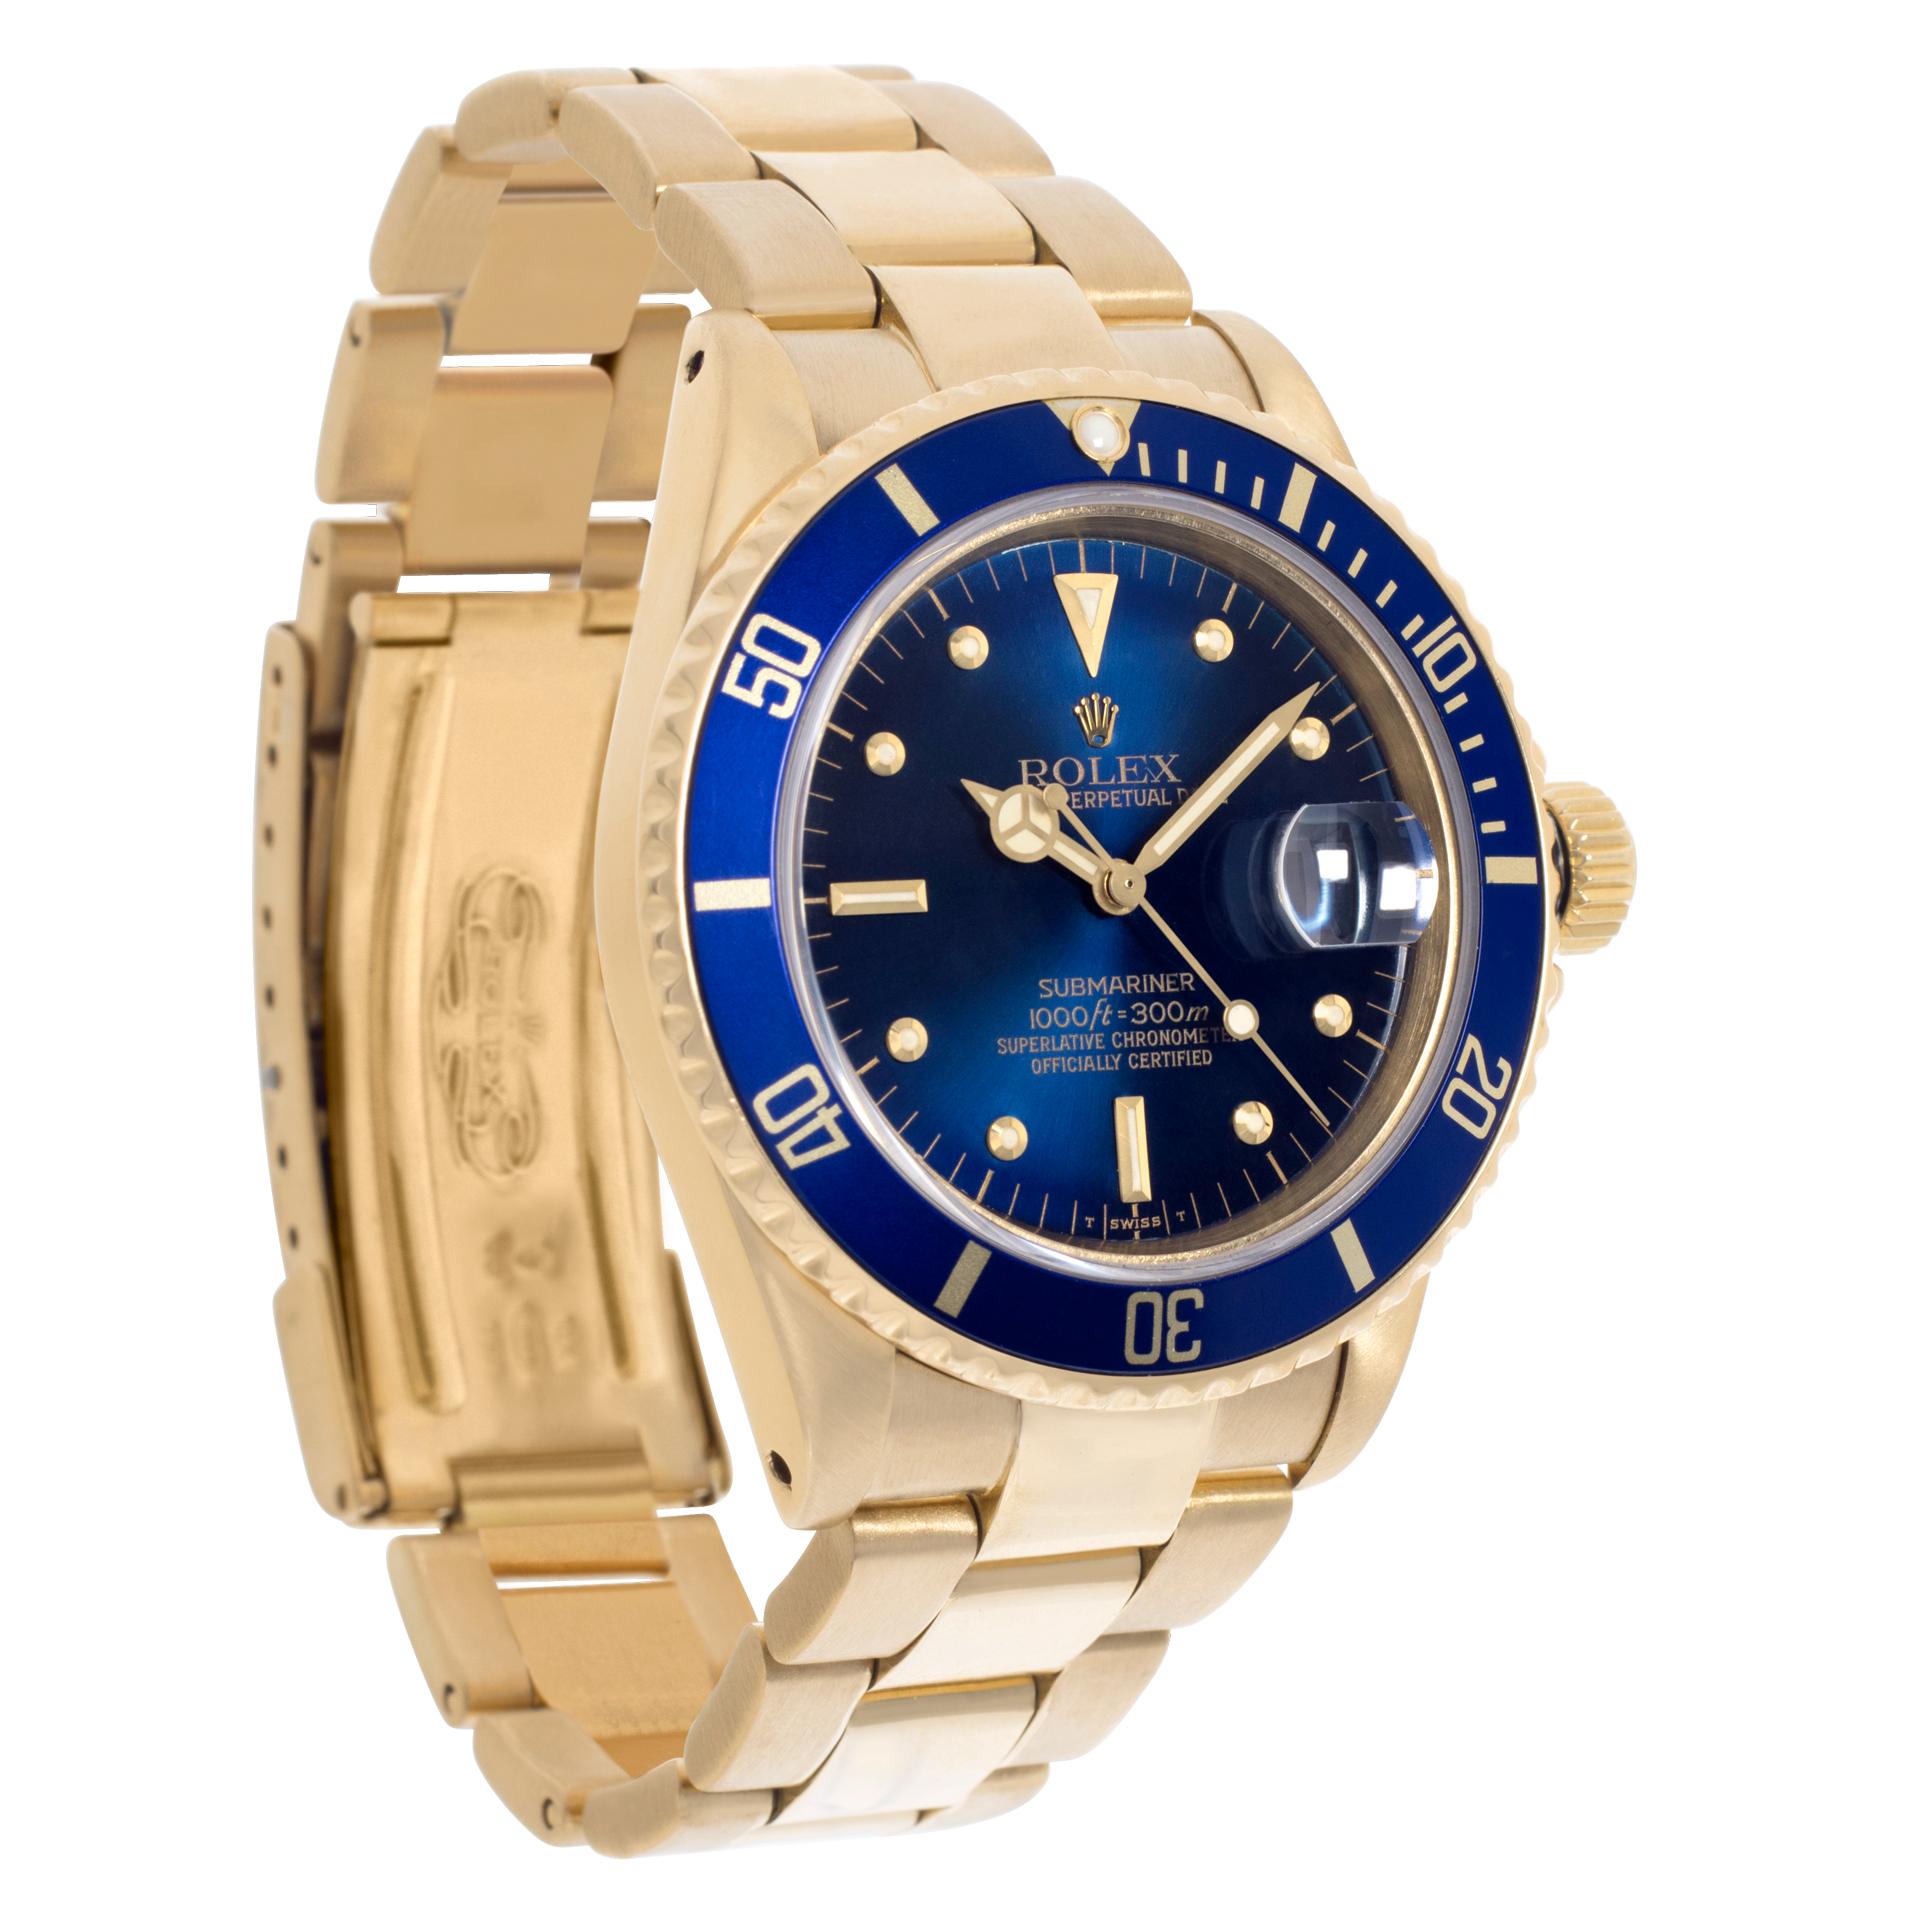 Rolex Submariner 18k yellow gold Automatic Wristwatch Ref 16808 In Excellent Condition For Sale In Surfside, FL